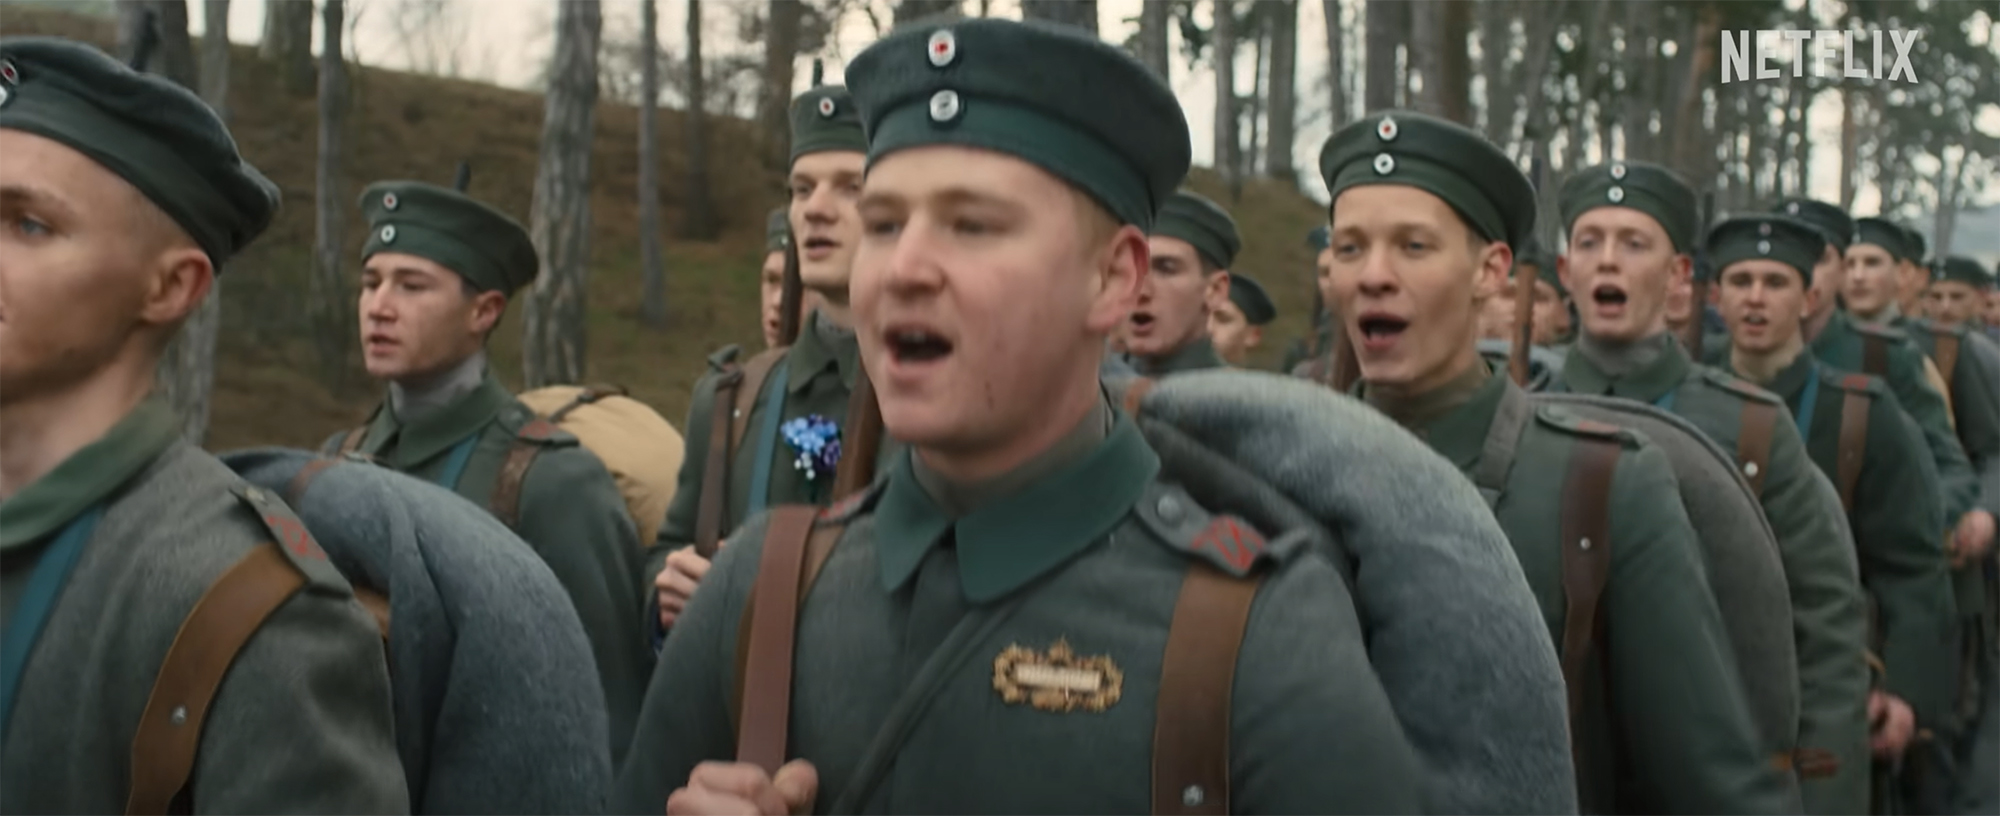 Film still of two lines of WWI soldiers in German uniform marching along while singing